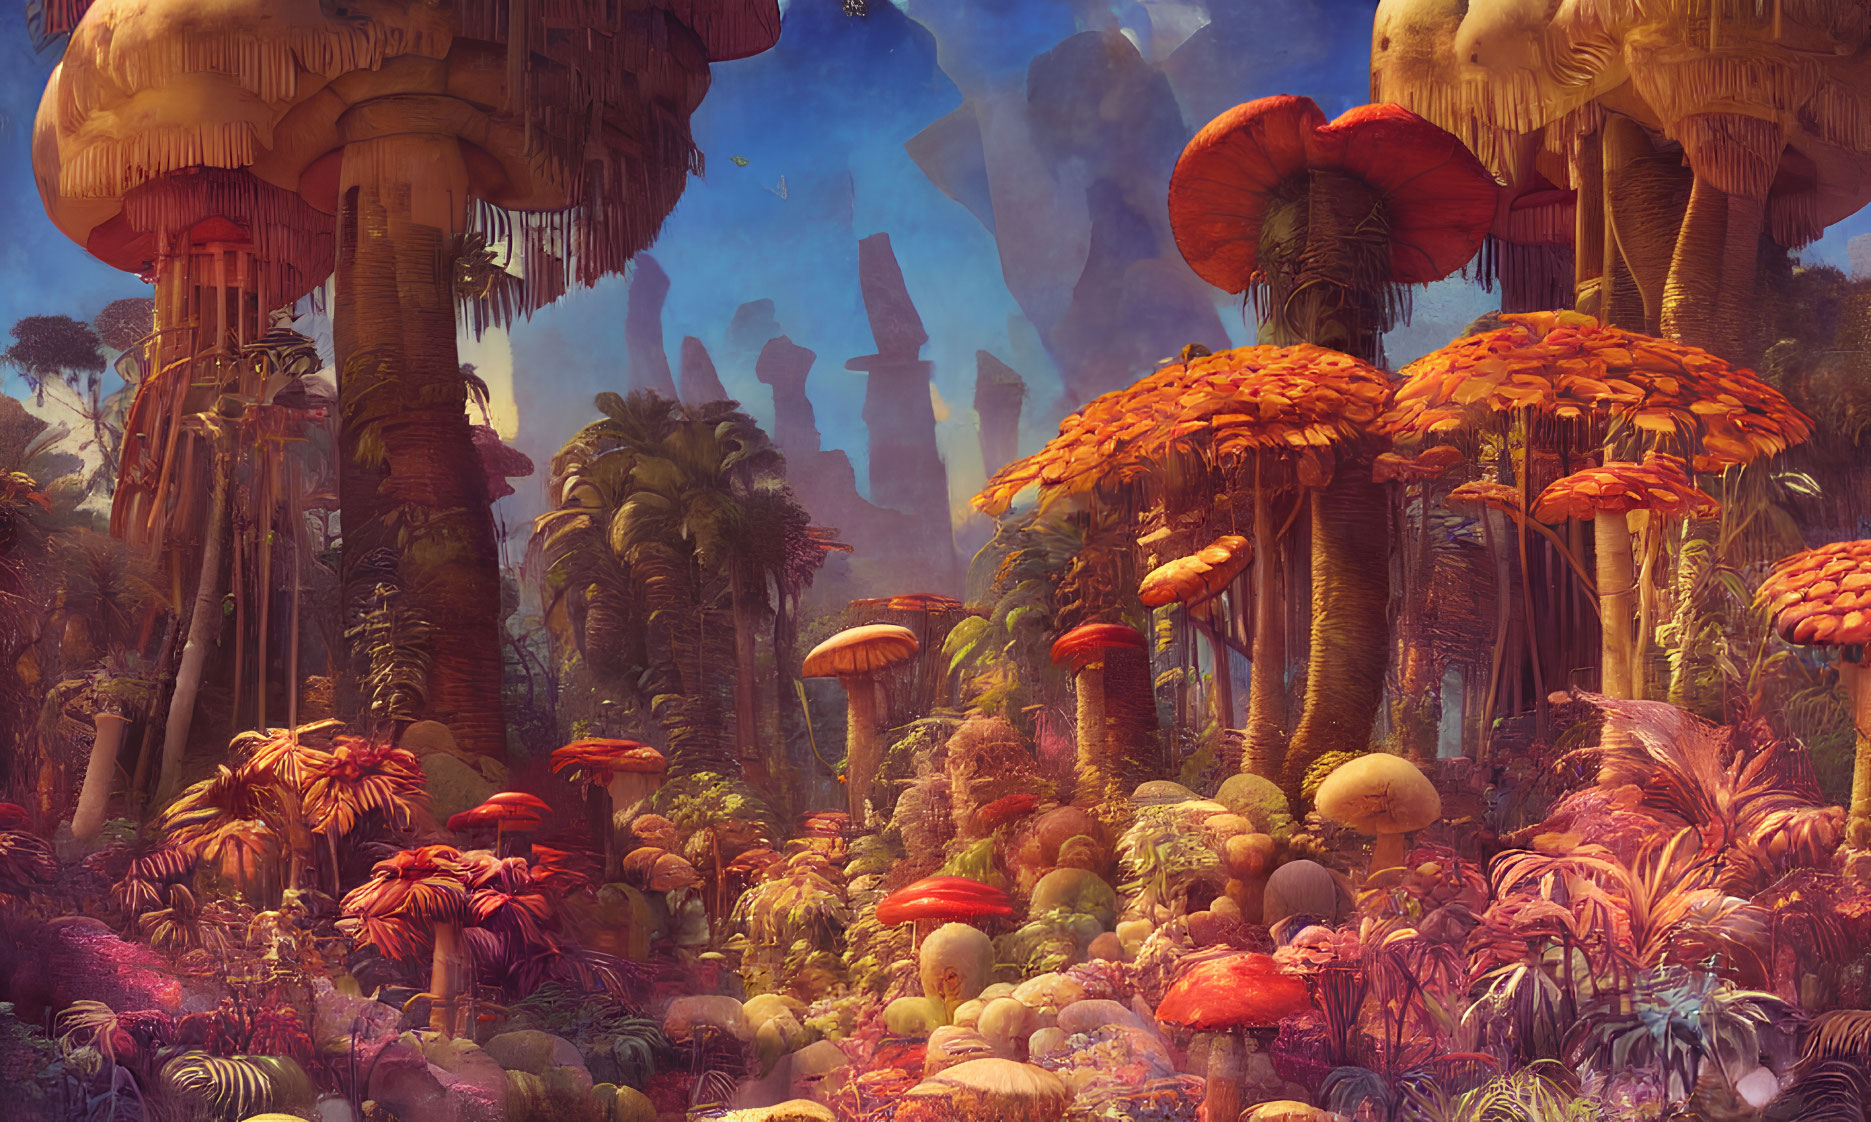 Colorful alien landscape with towering mushroom trees & warm atmosphere